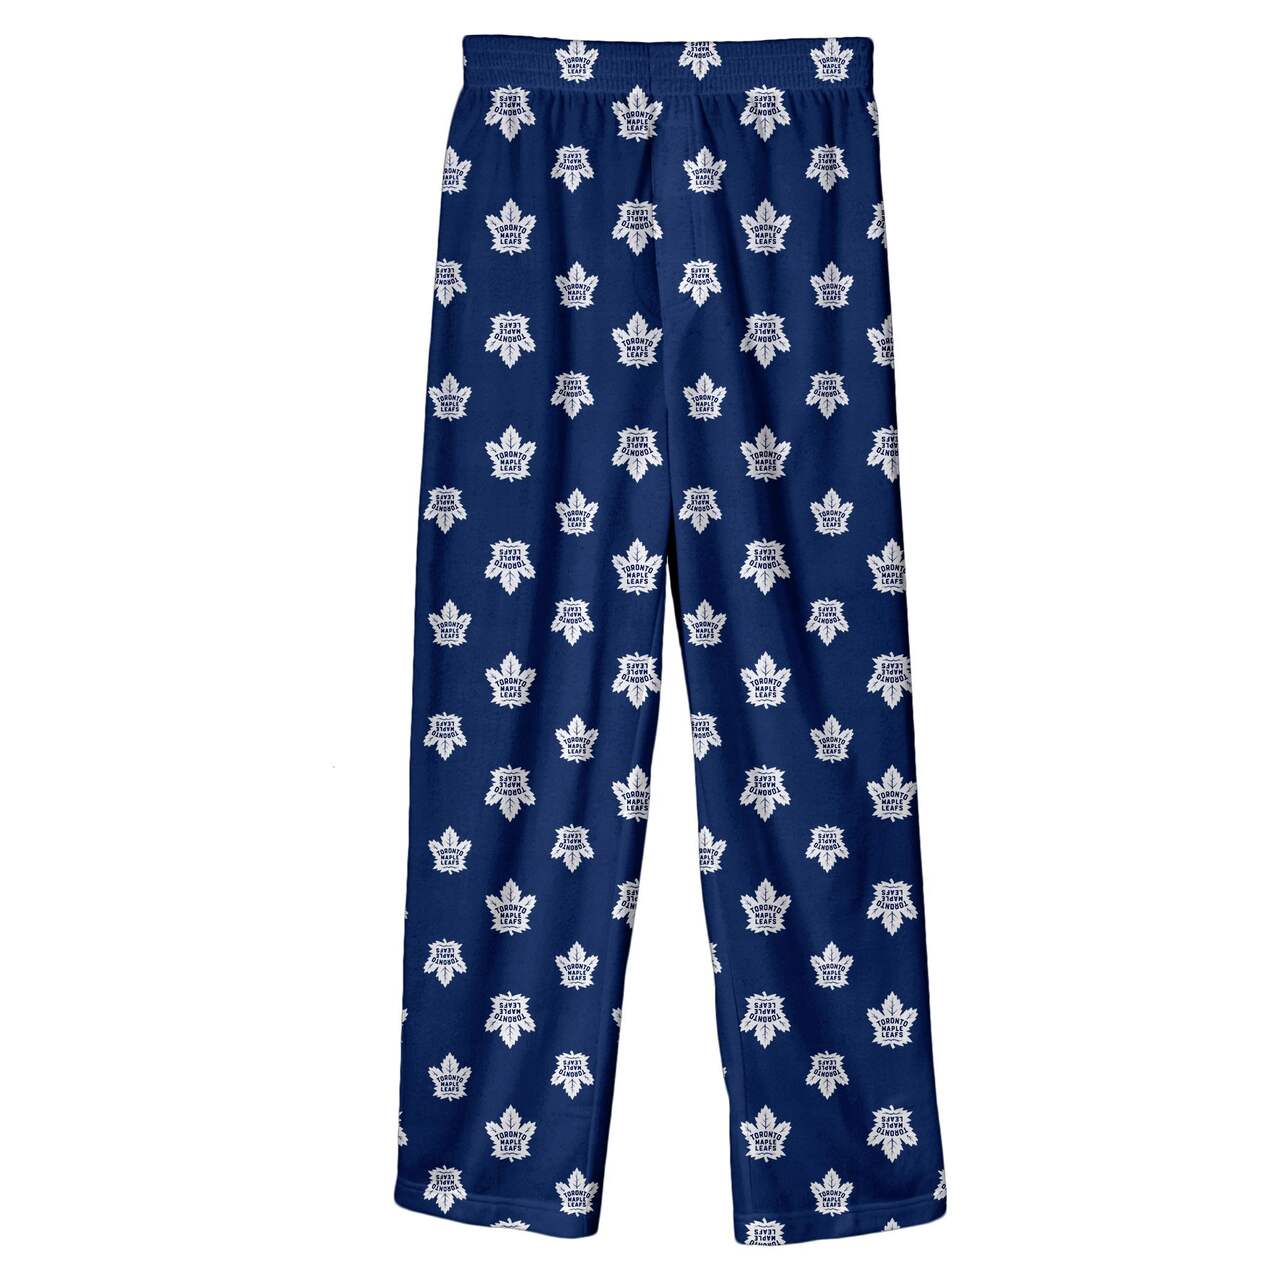 https://media-www.canadiantire.ca/product/playing/hockey/hockey-accessories/0839017/toronto-maple-leafs-sleep-pant-small-0b76e10f-36ad-47dd-a695-89ced92c8137-jpgrendition.jpg?imdensity=1&imwidth=640&impolicy=mZoom